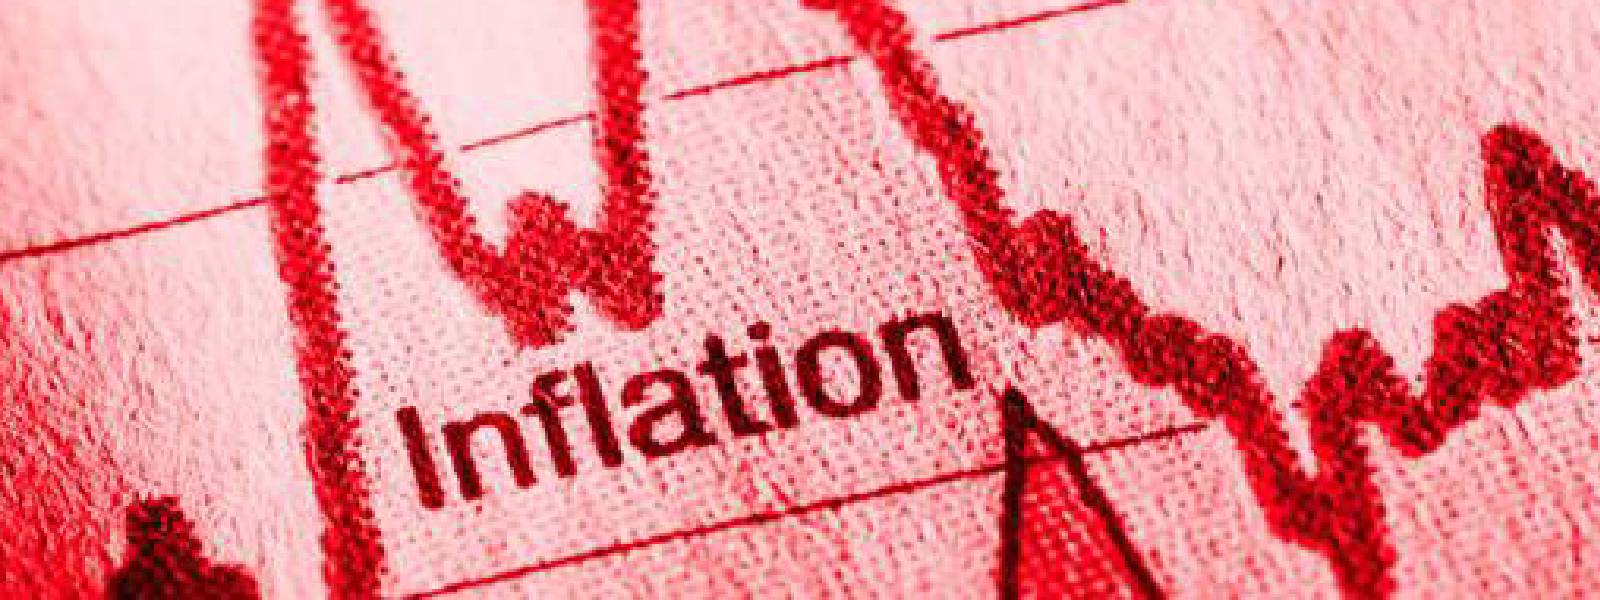 Food Inflation spiked to 94.9% in September 2022